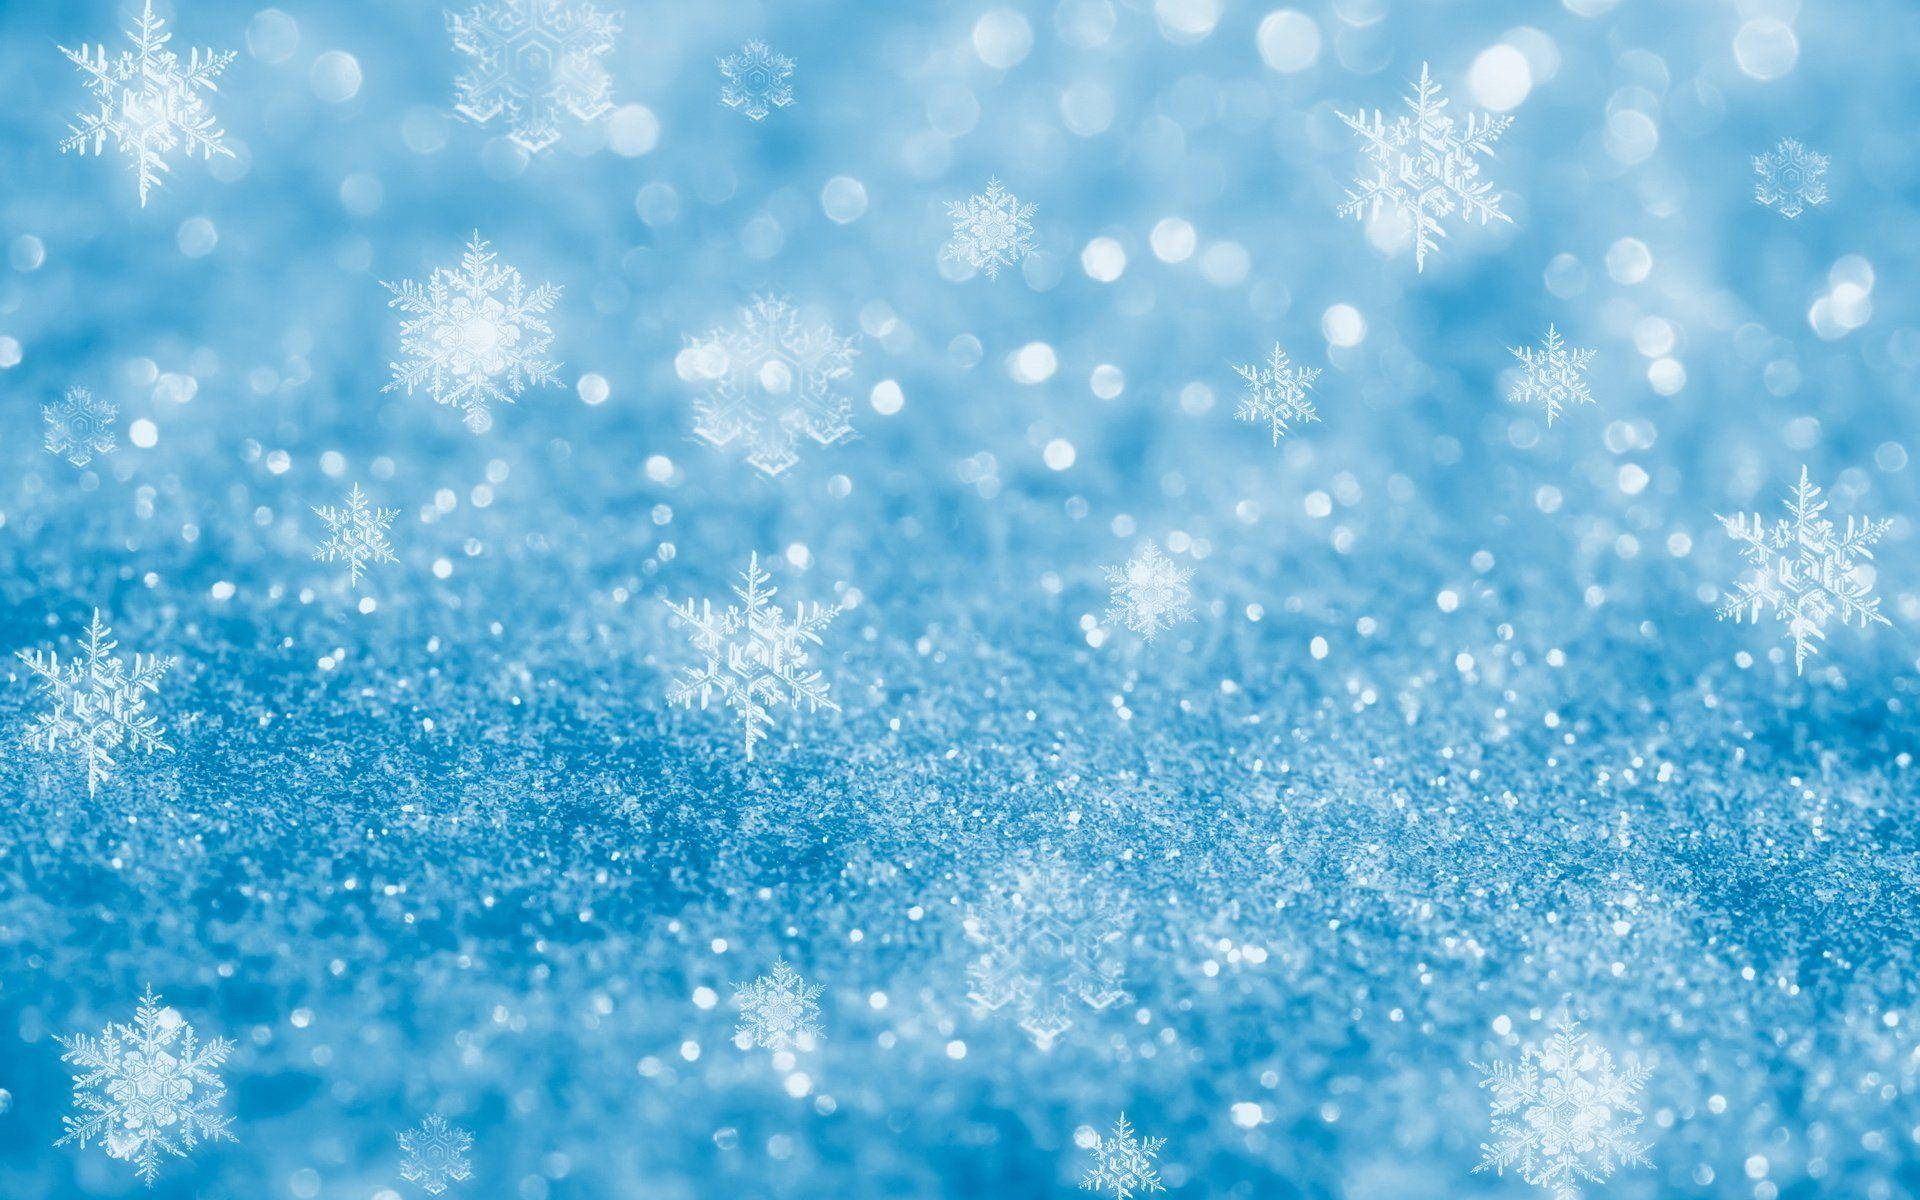 Sparkly Snowflakes And Blue Glitters Wallpaper